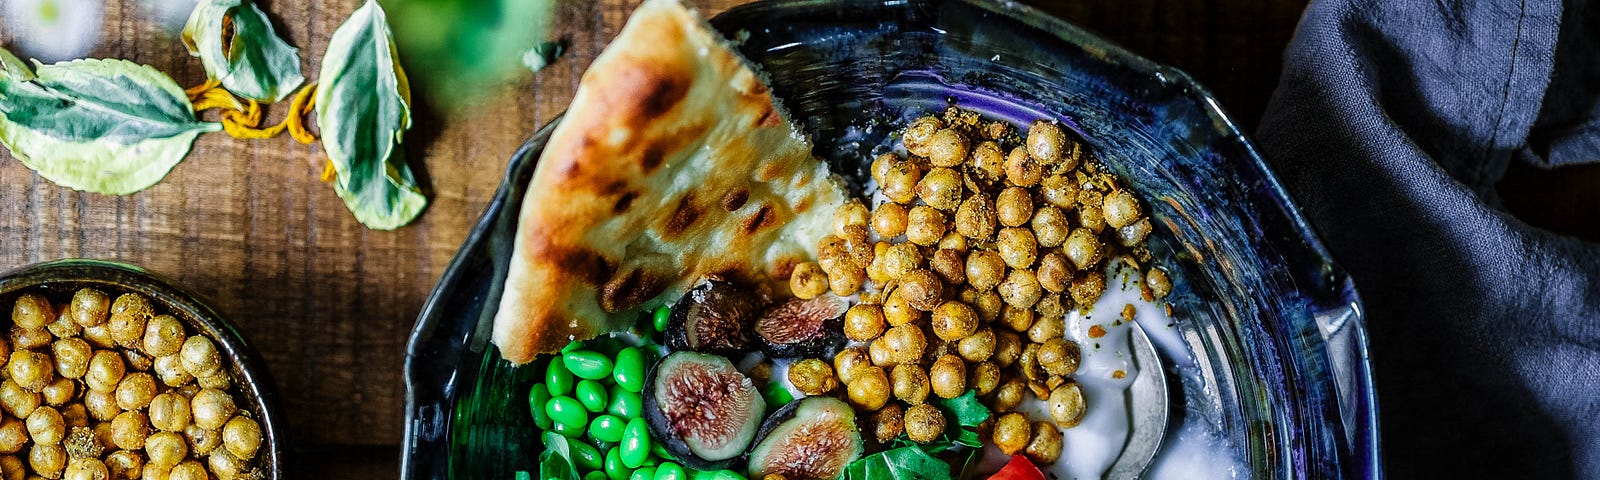 bowl of chickpea, red veggies, peas, slice of focaccia bread — healthful and colorful looking